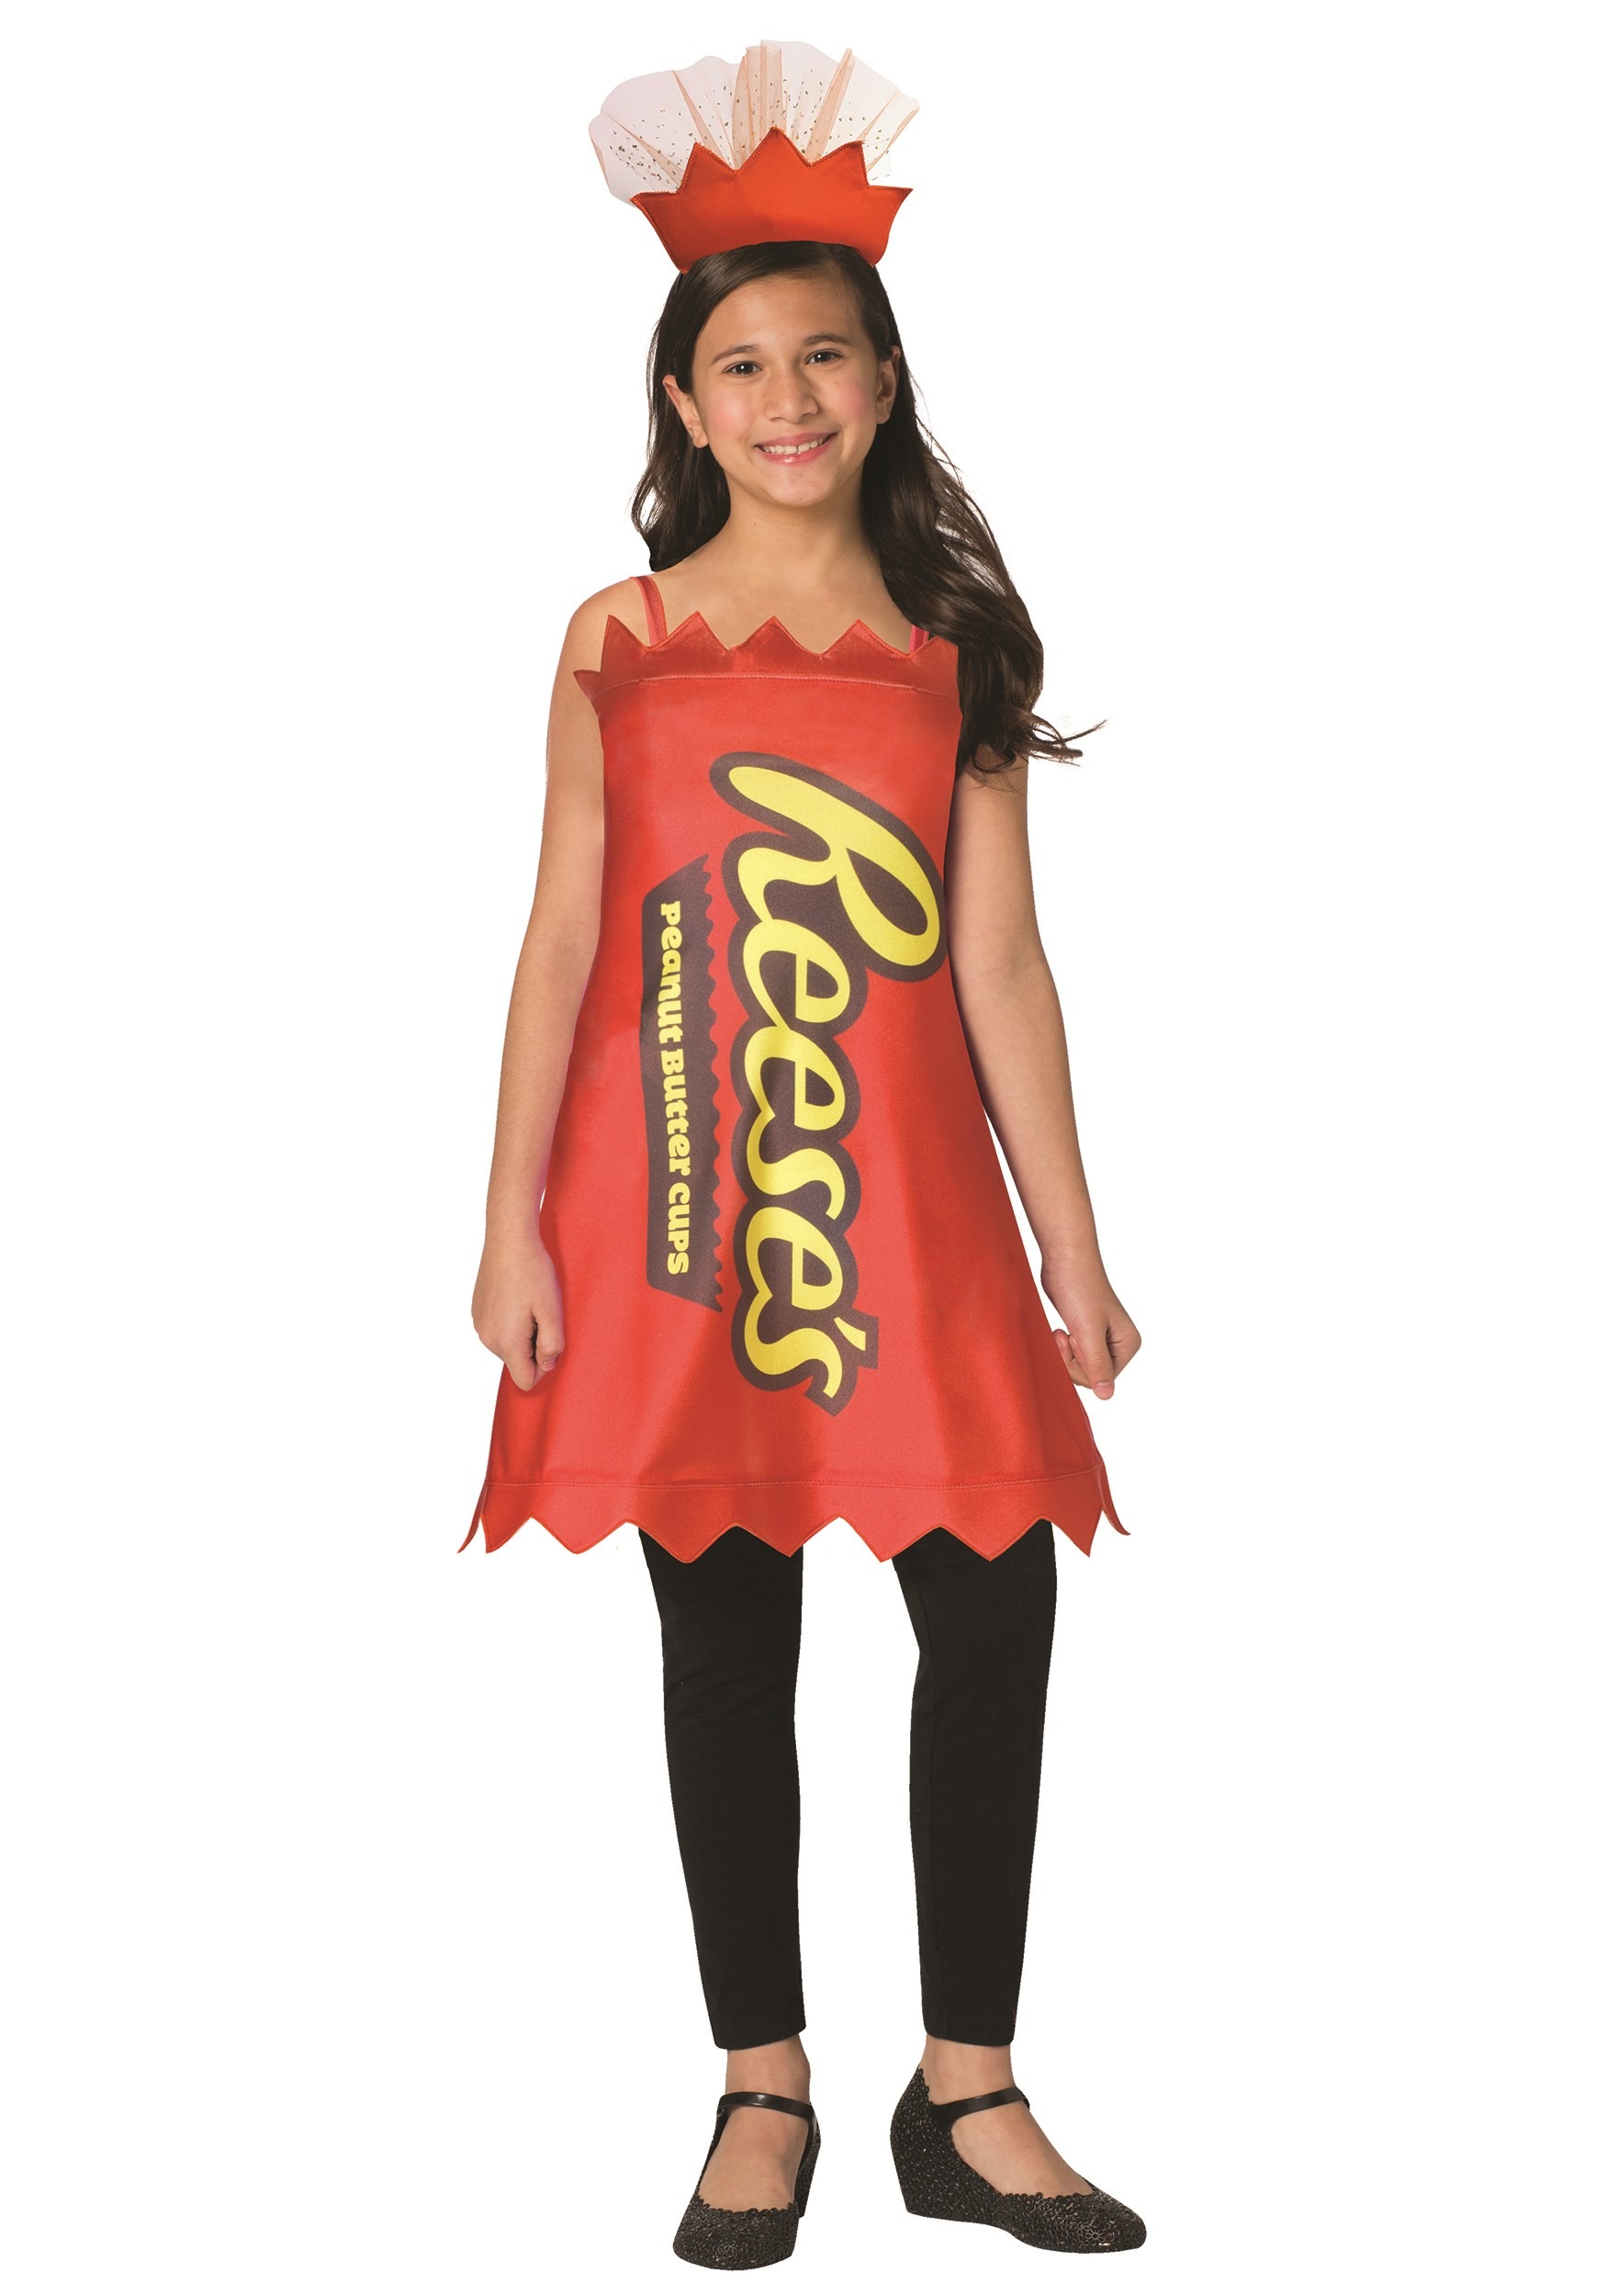 Photos - Fancy Dress Morris Costumes Reese's Cup Costume for Girls Yellow/Orange MO3593-710 